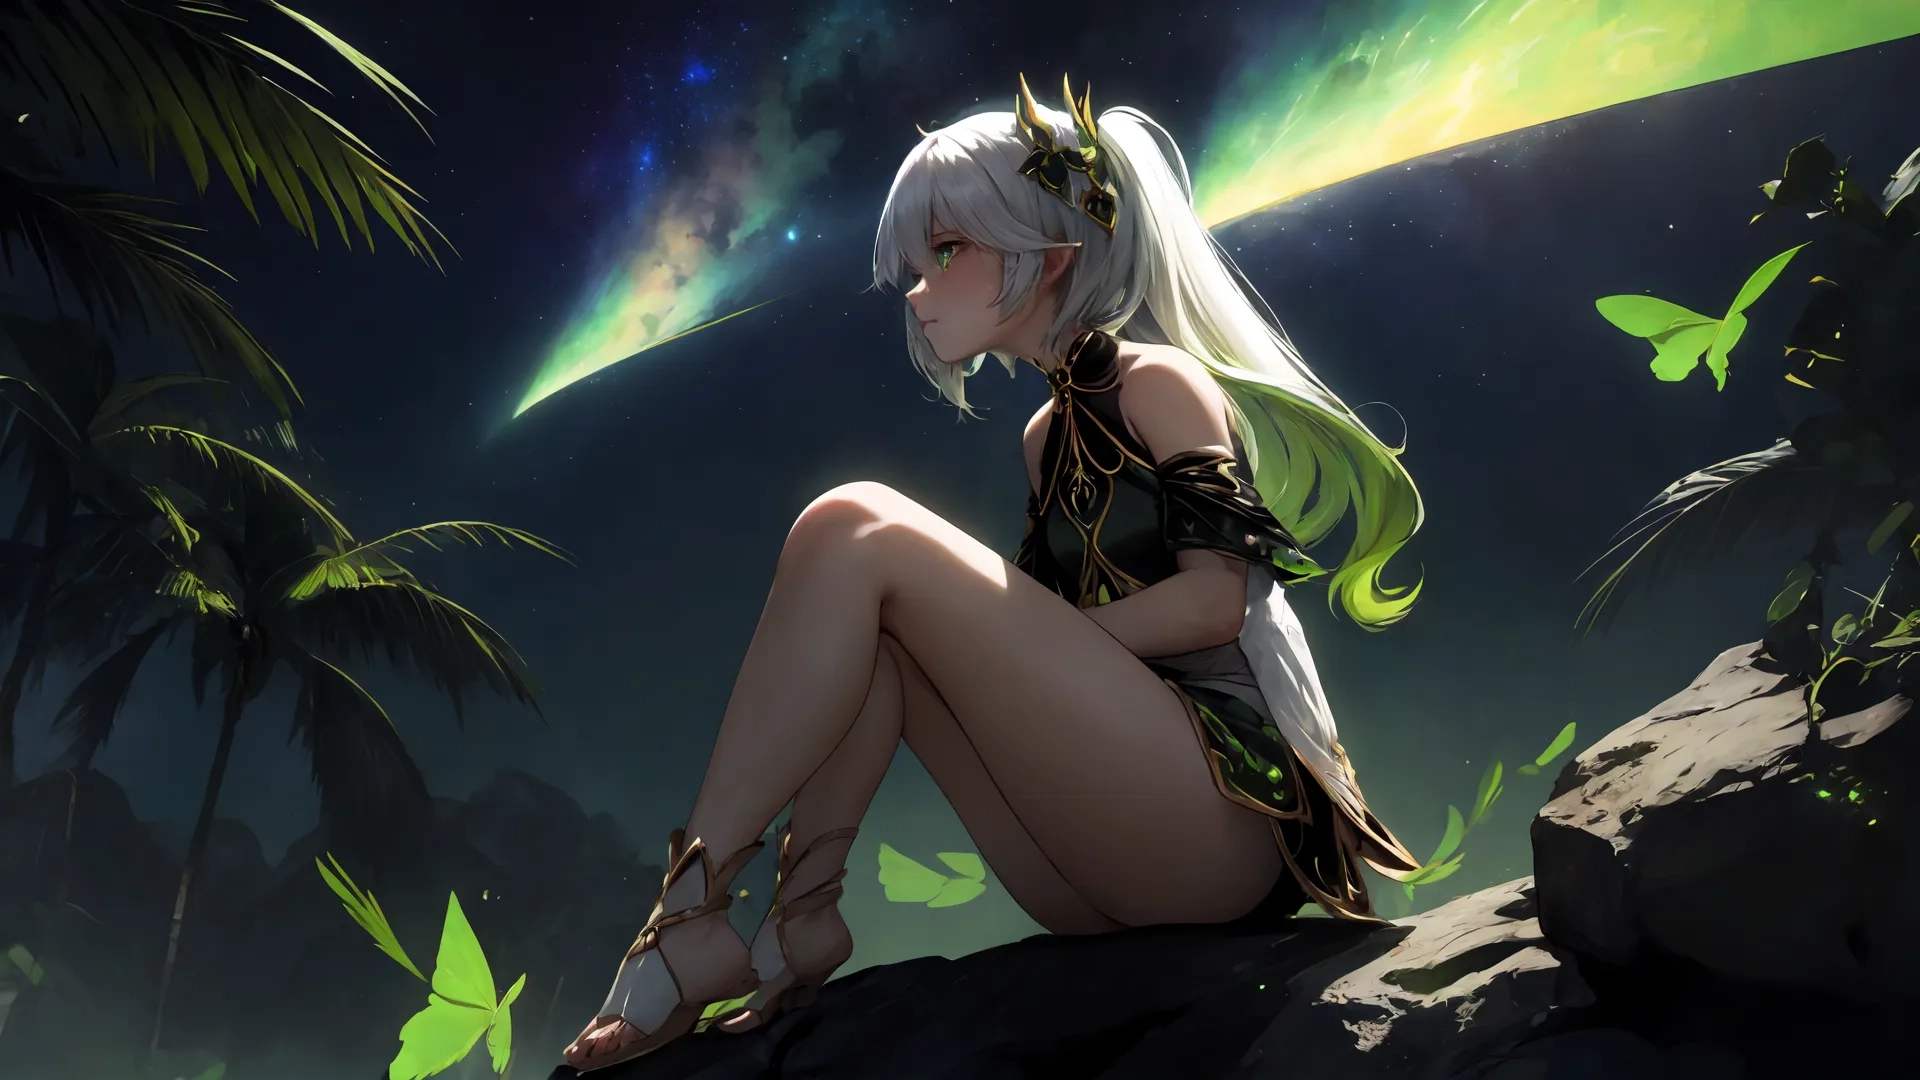 a women that is sitting on rocks by some plants and trees with a moon above her feet and her hair curled back, and holding a bow, near to her hand near her chest
